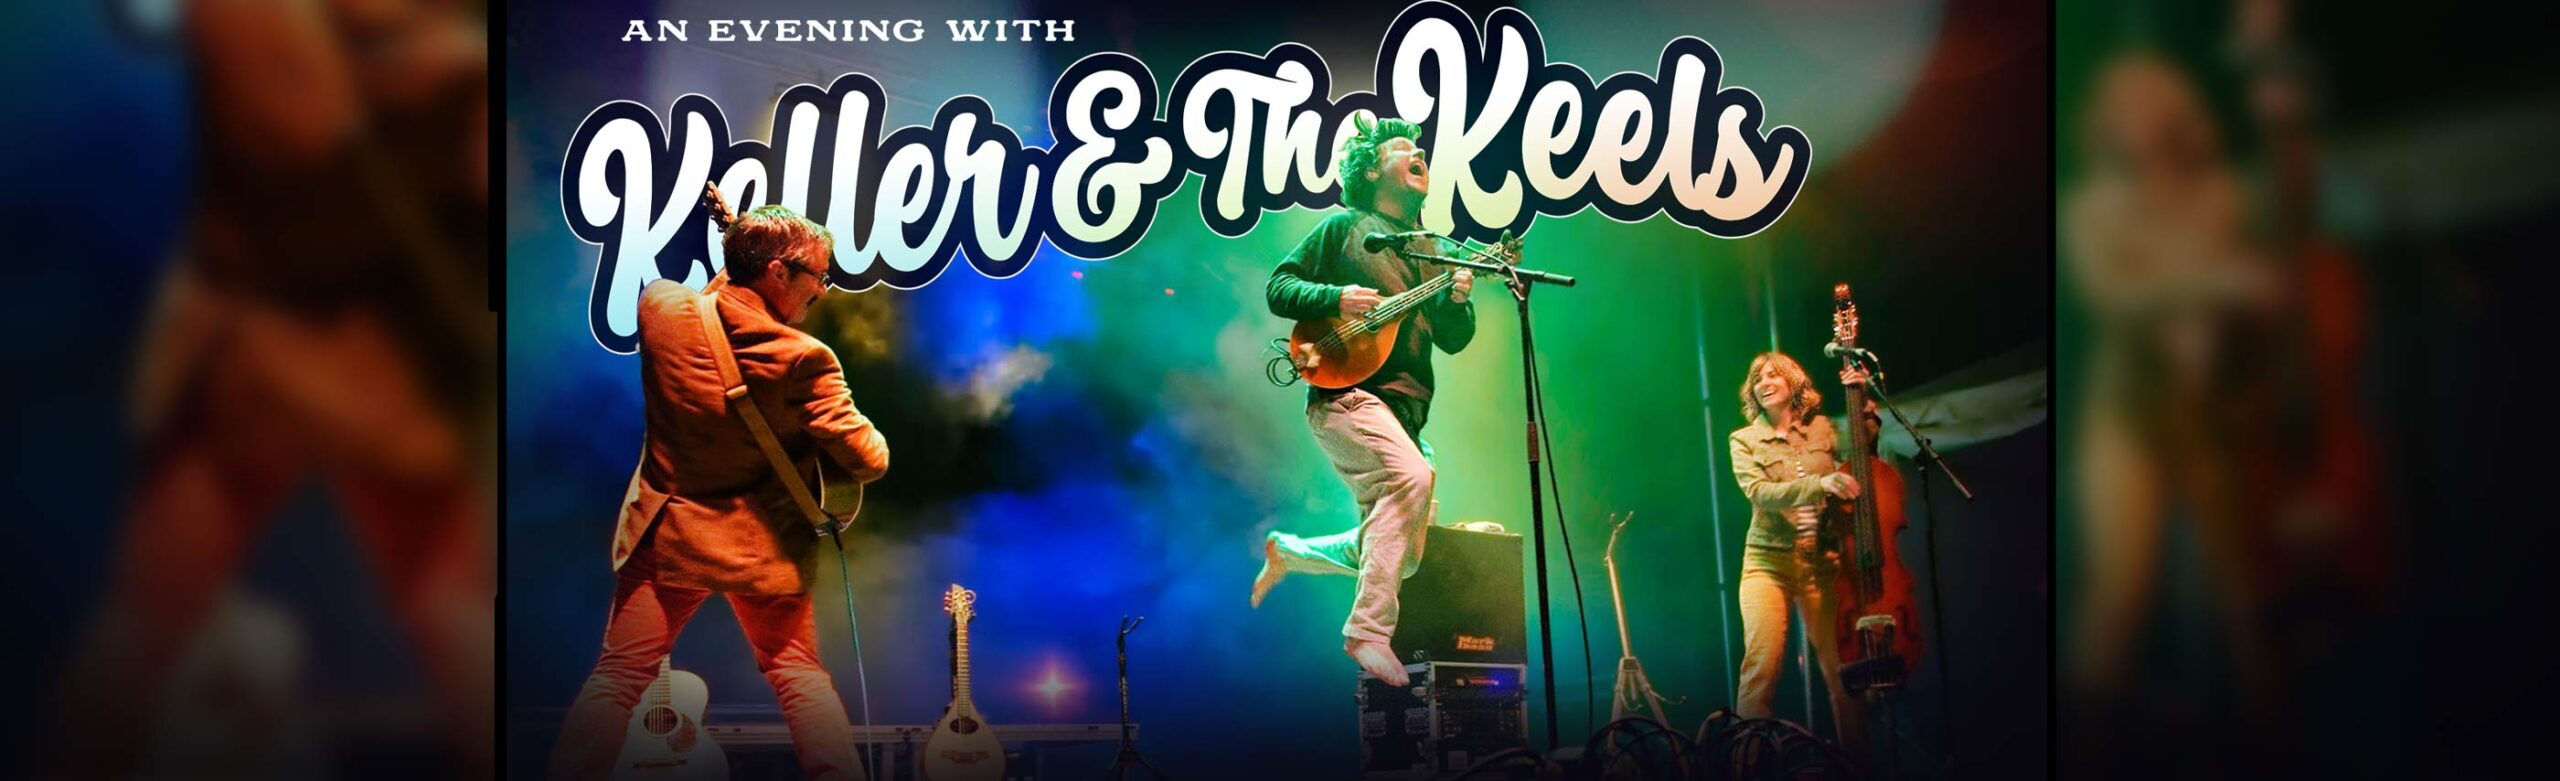 Keller & the Keels Announce Concert at The Wilma Image